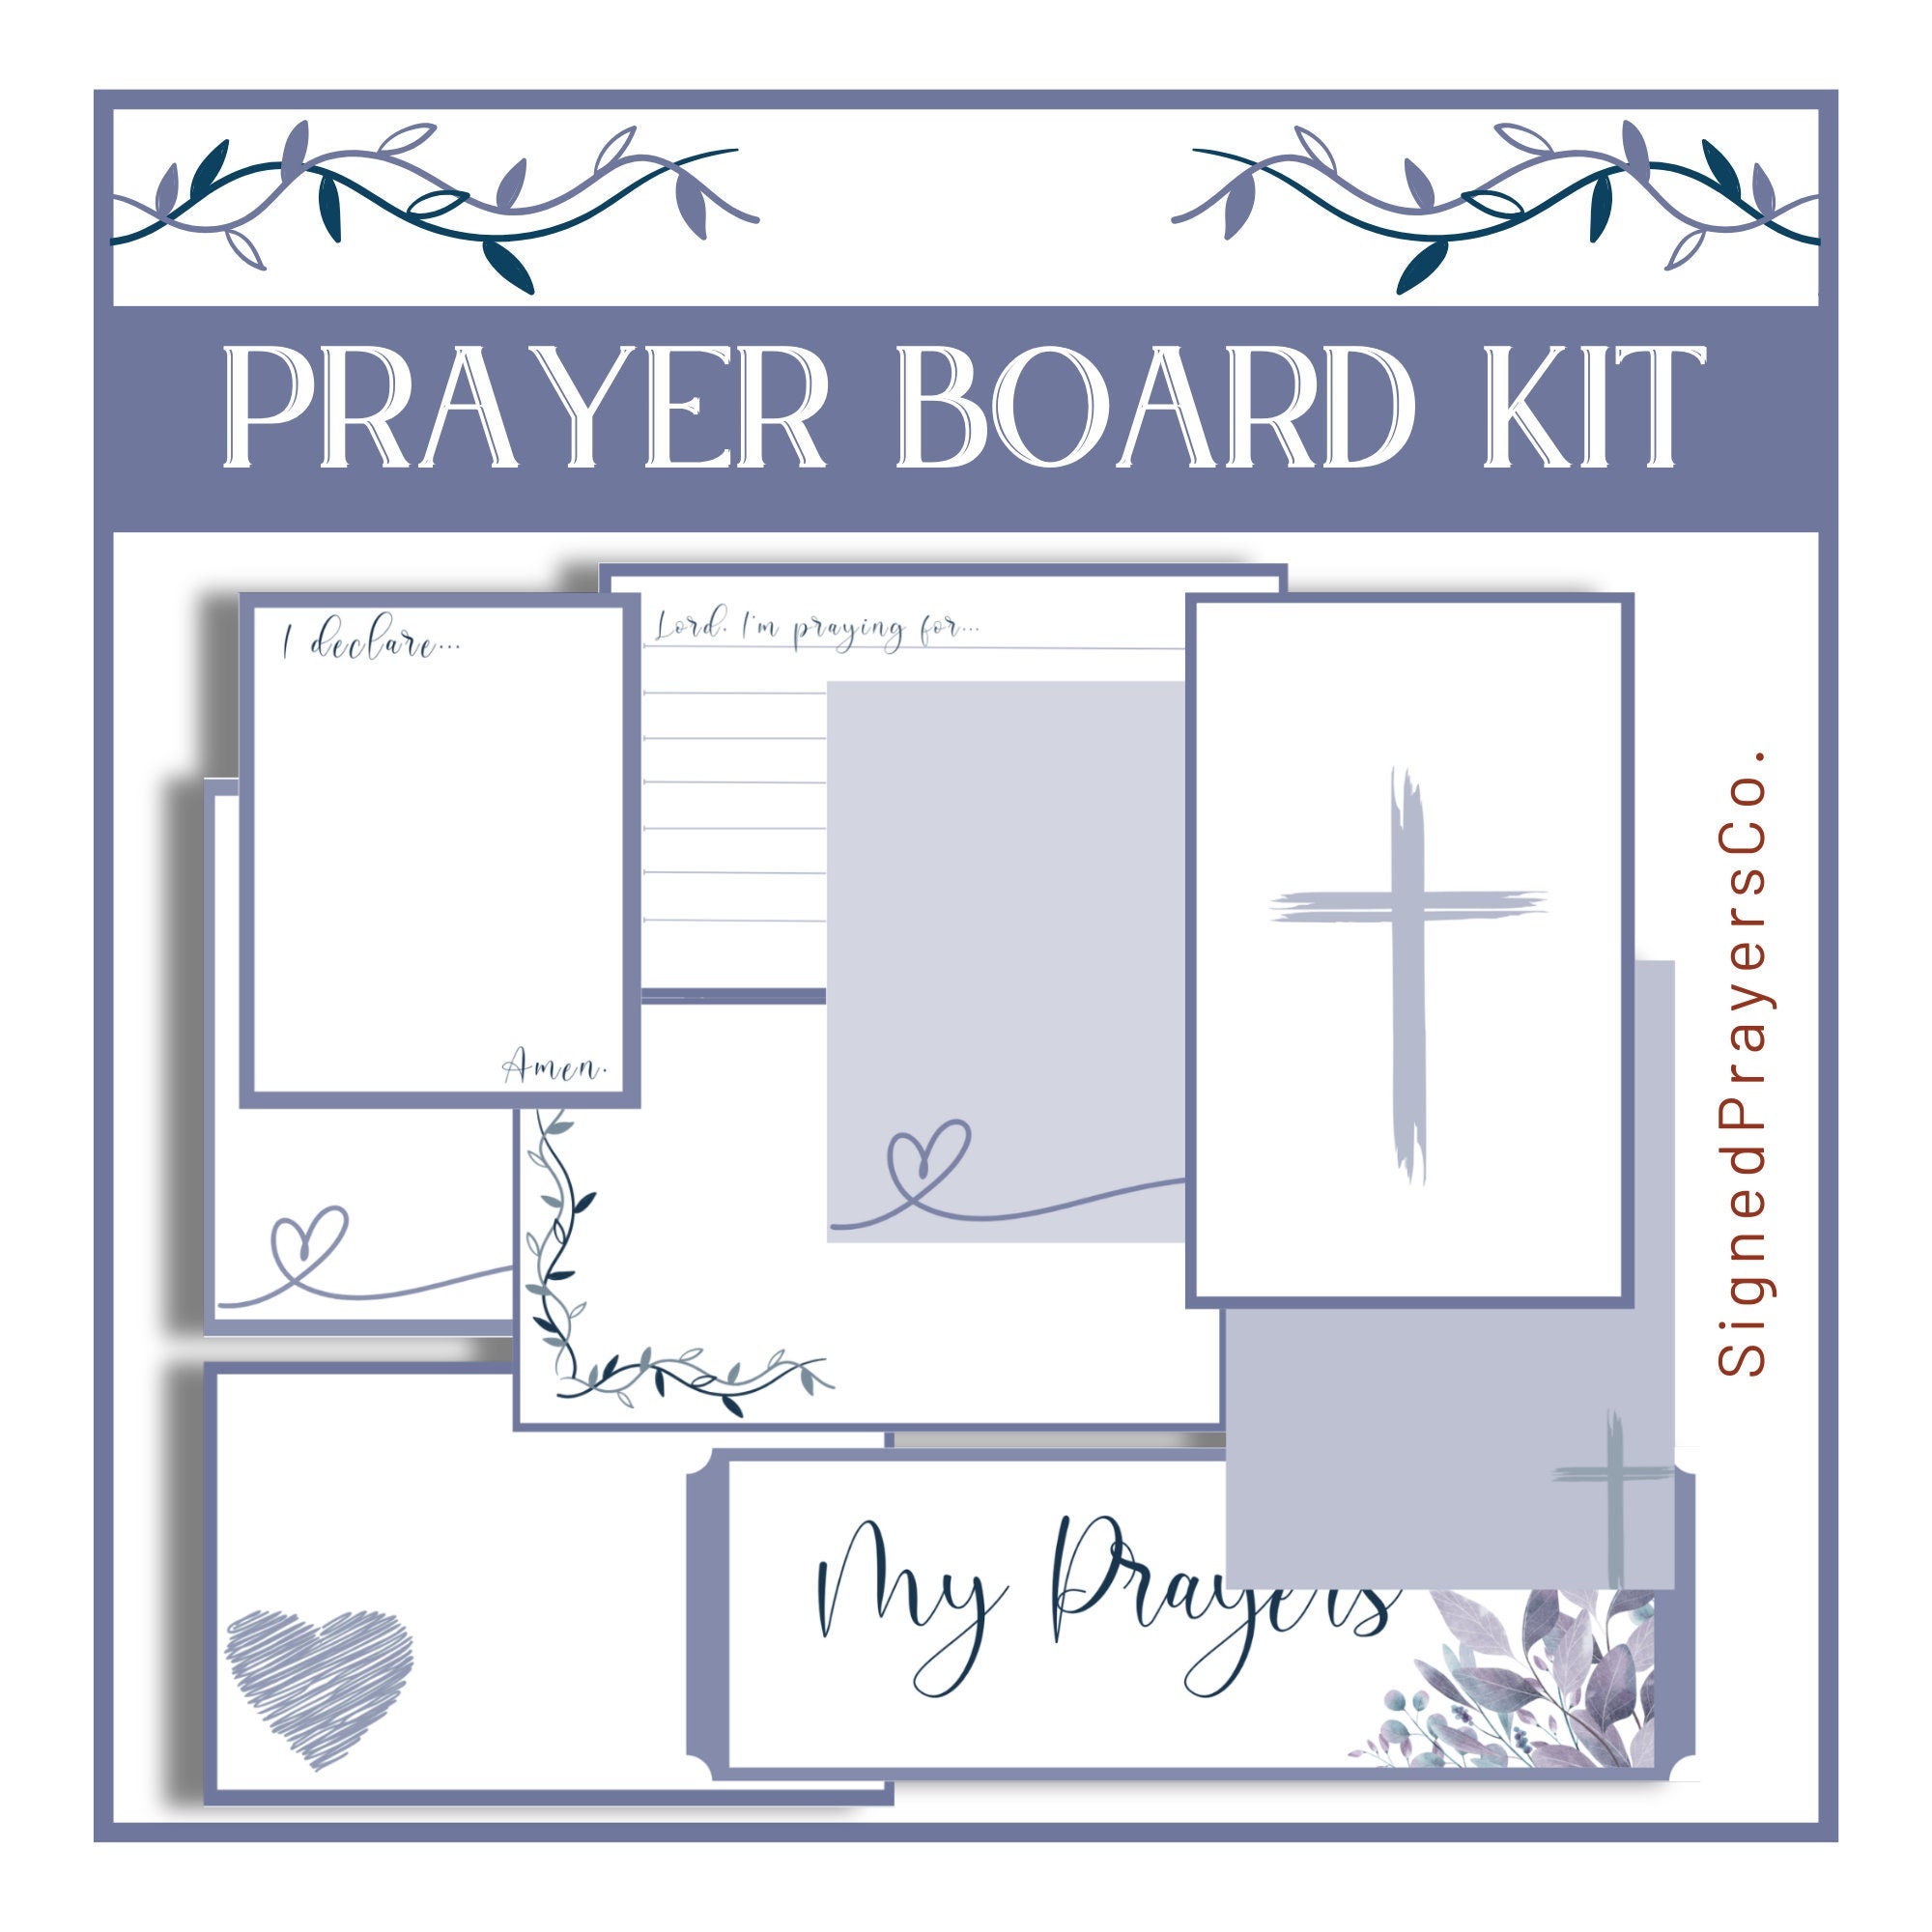 Printable Prayer Board Kit Sophisticated Edition Christian Church Prayer  Group Bible Verse Cards Craft Activity Instant Download 